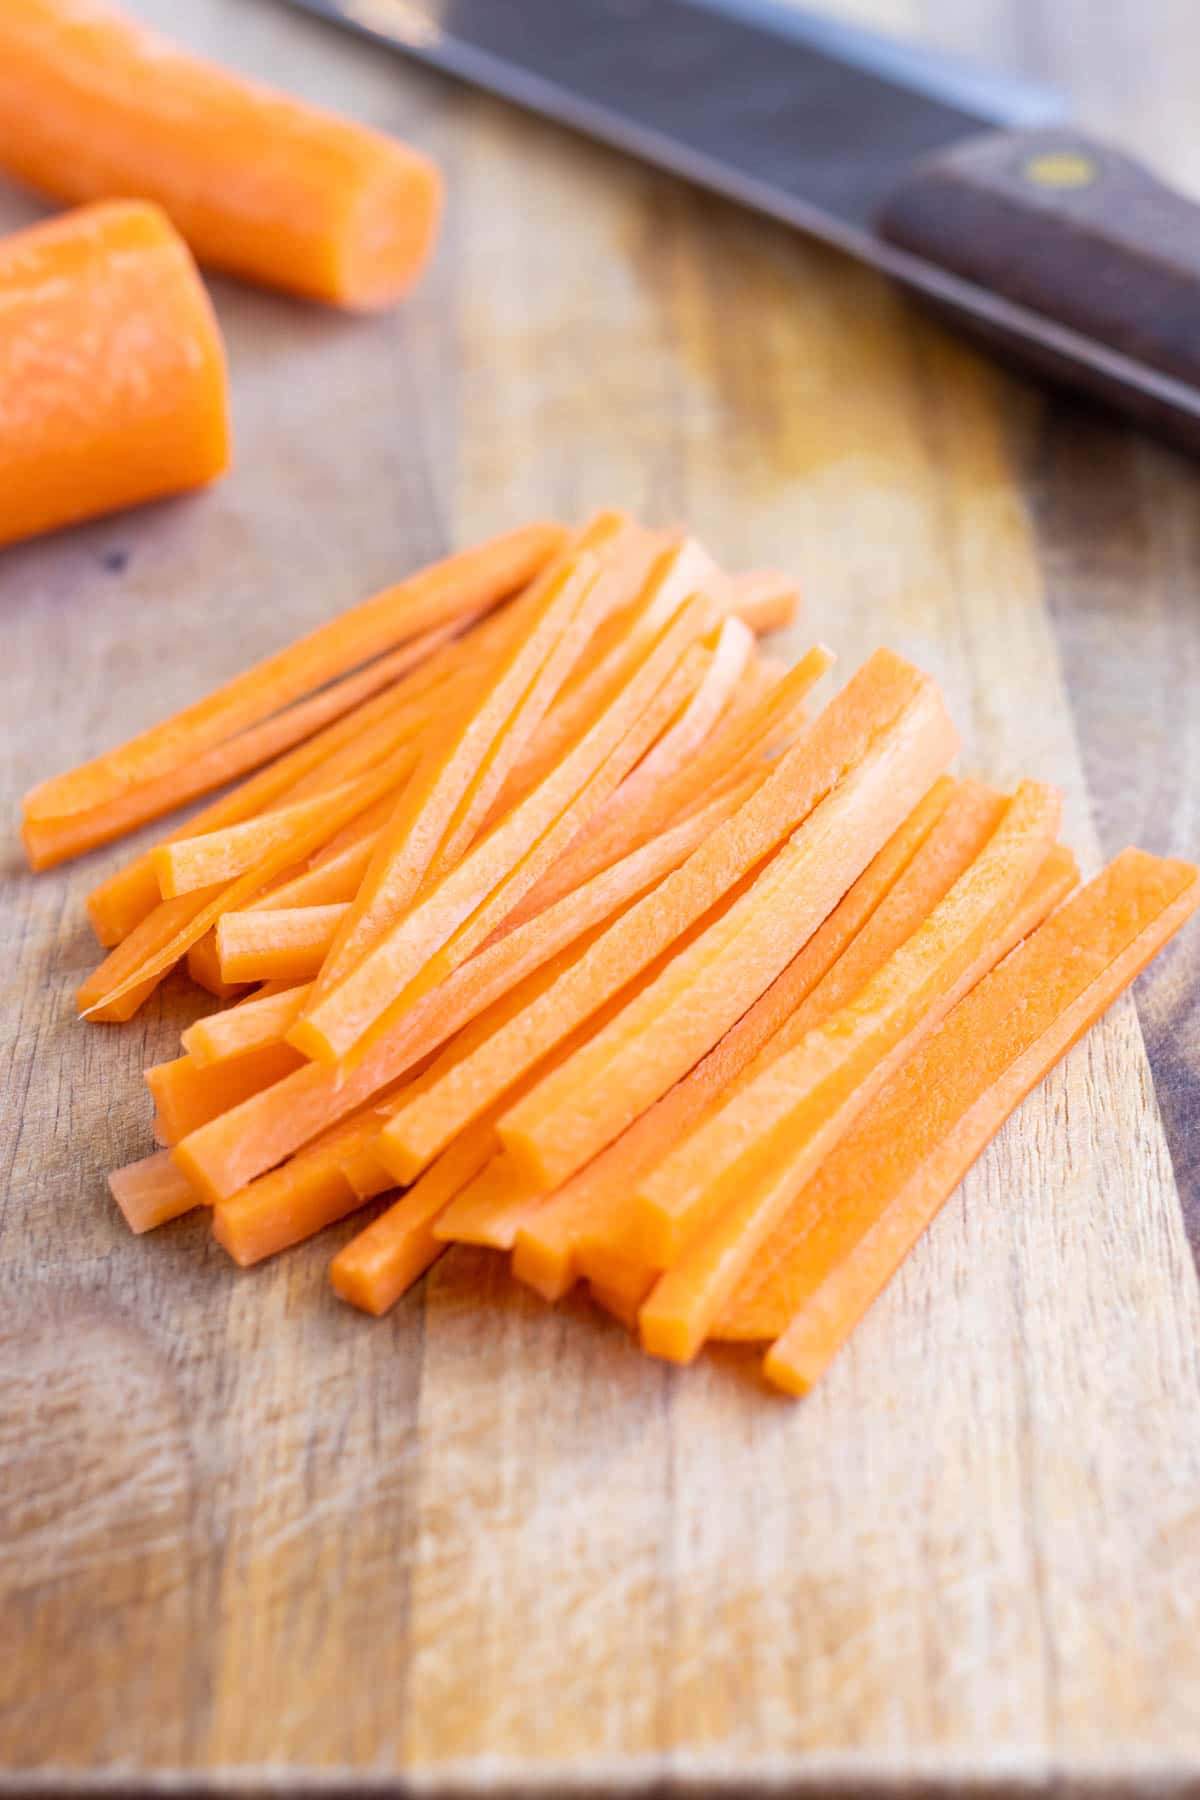 A pile of Julienne carrots are shown next to a knife.